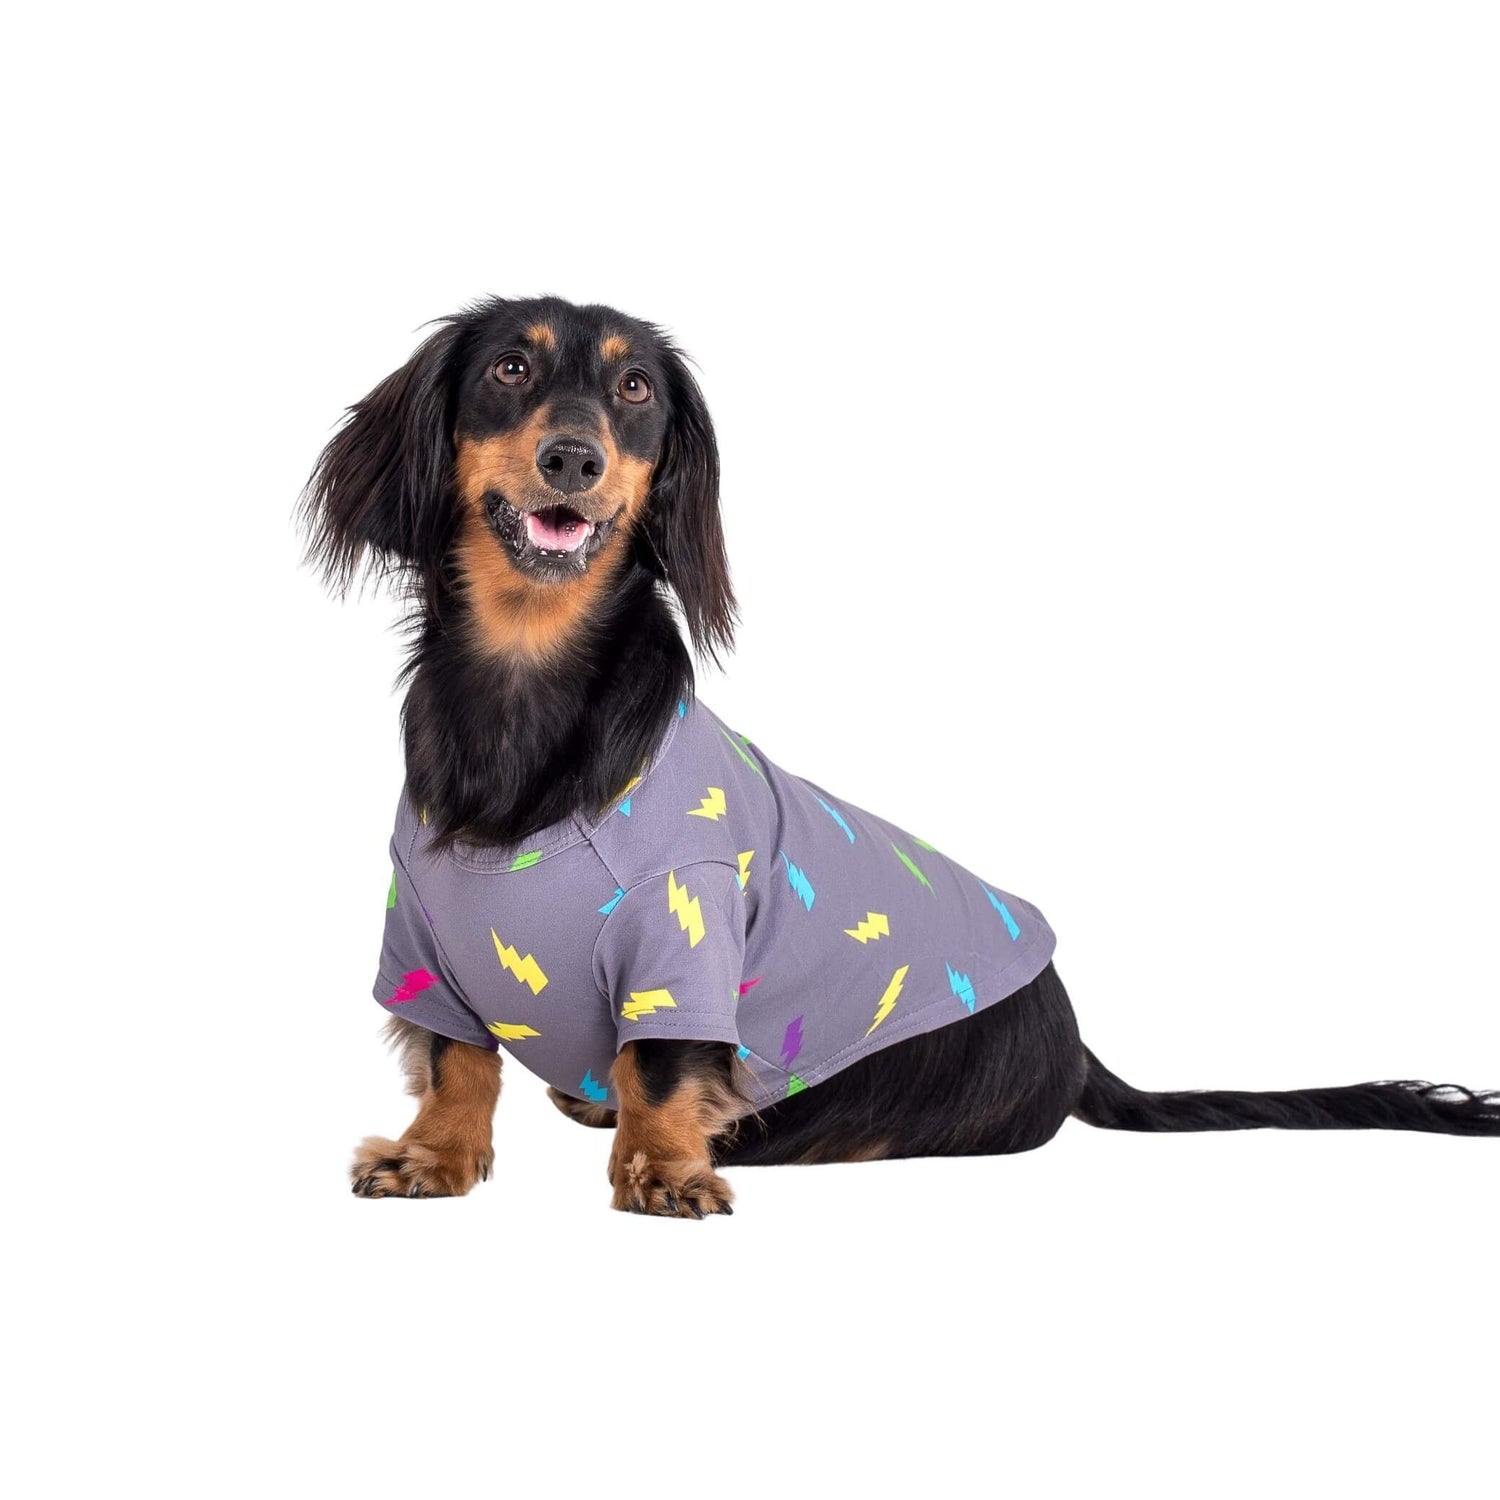 Dachshund facing the camera. The dog is wearing an Electric Energy dog pyjammas madfe by Vibrant hOUND.